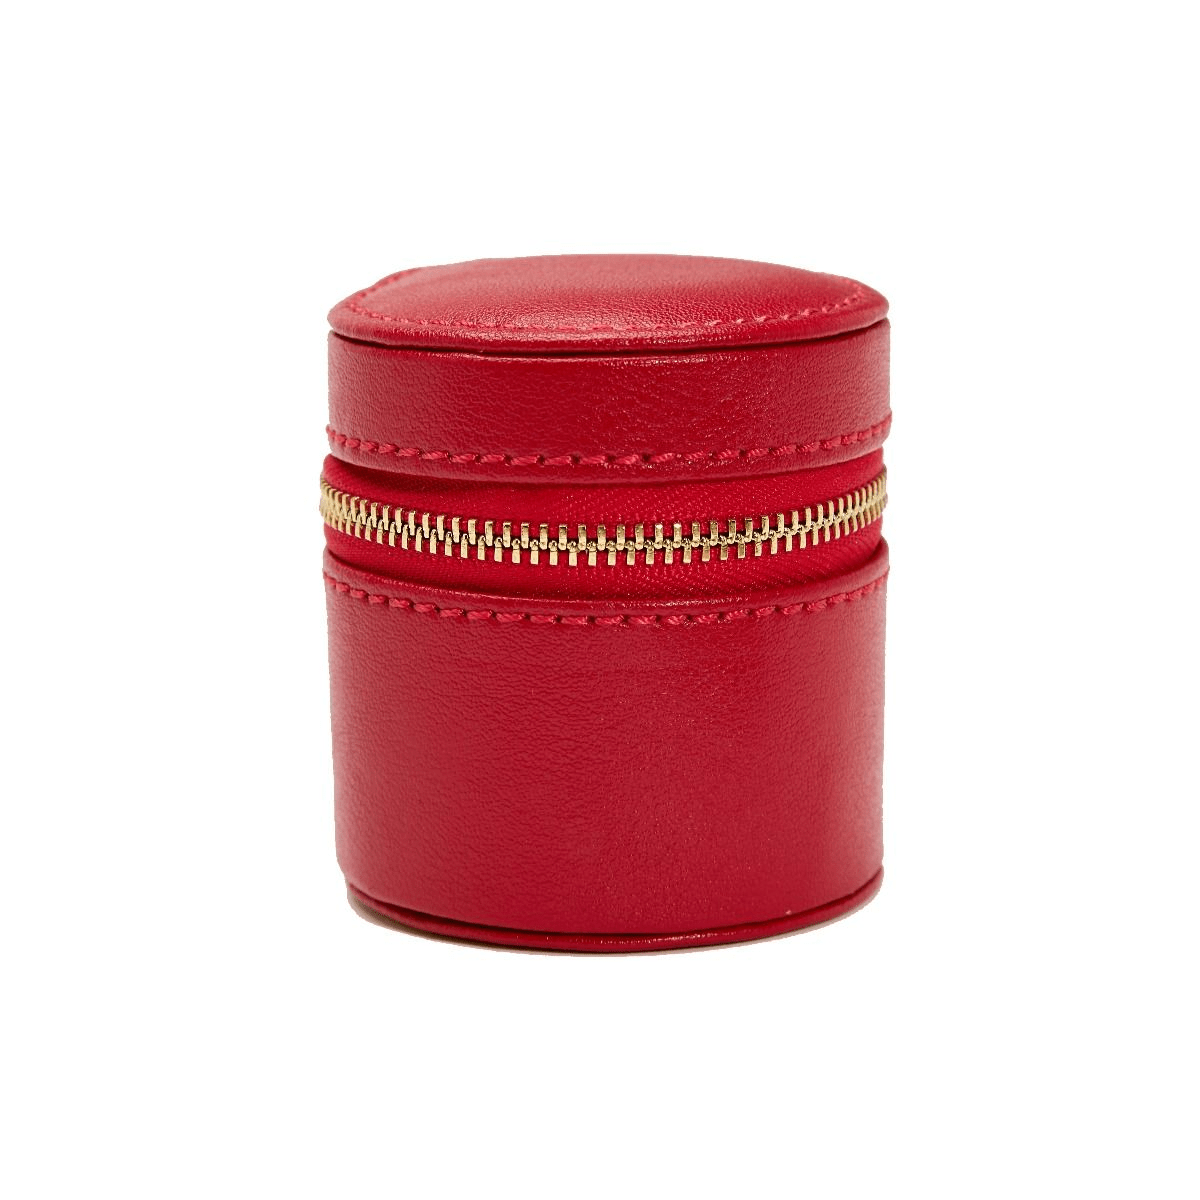 WOLF Palermo Red Double Watch Roll With Jewelry Pouch 213972